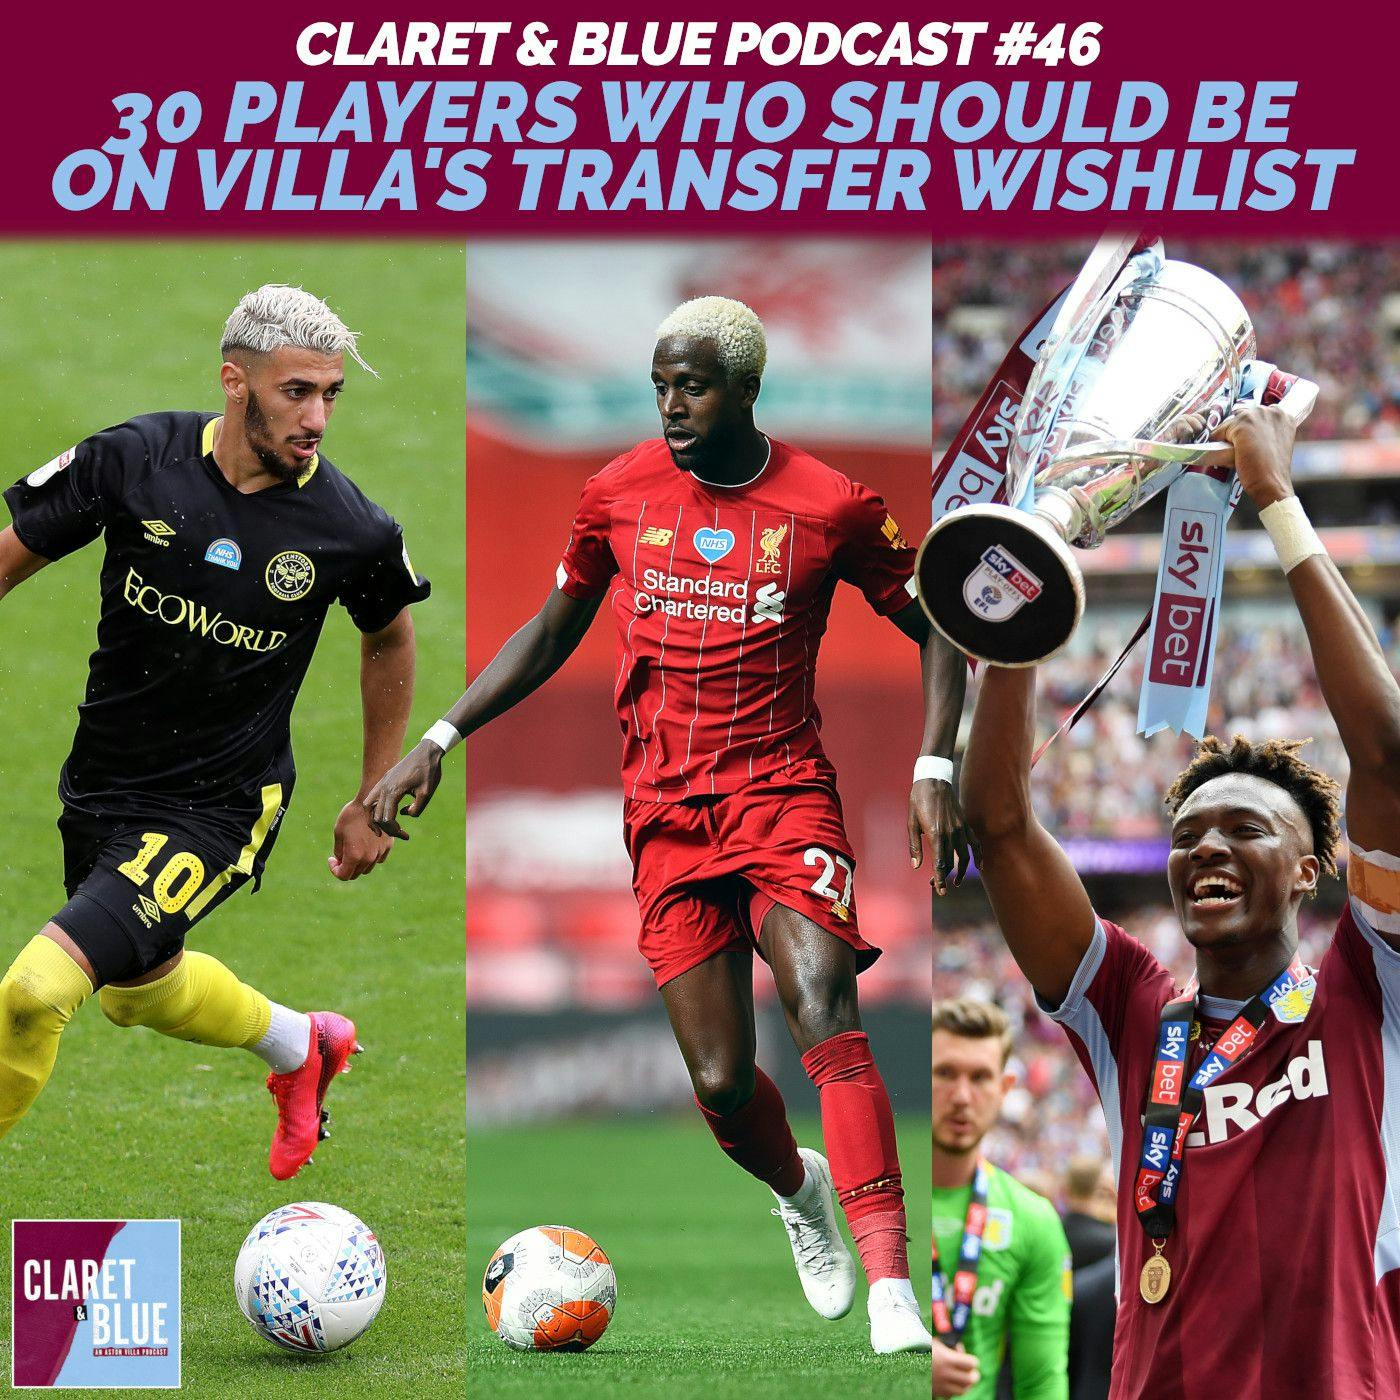 Claret & Blue Podcast #46 | 30 PLAYERS WHO SHOULD BE ON VILLA’S TRANSFER WISHLIST